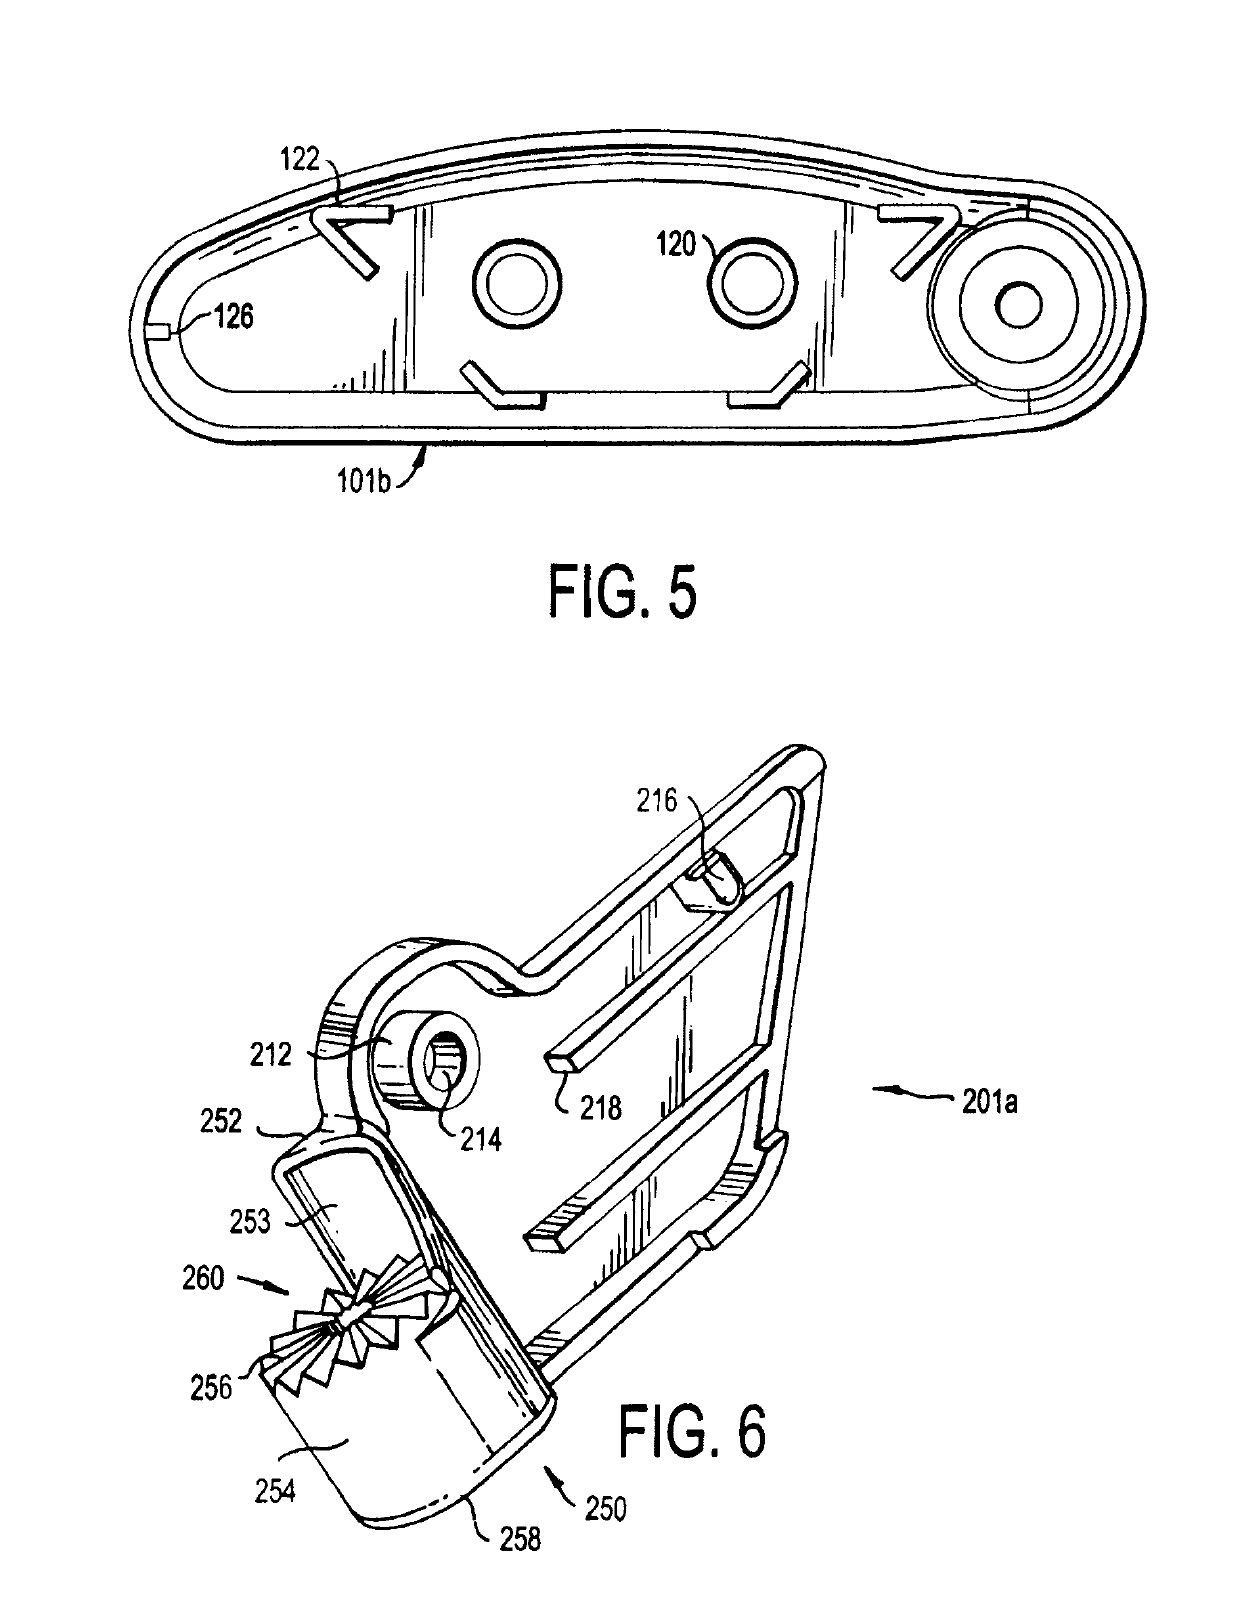 Utility knife with pivoting head assembly